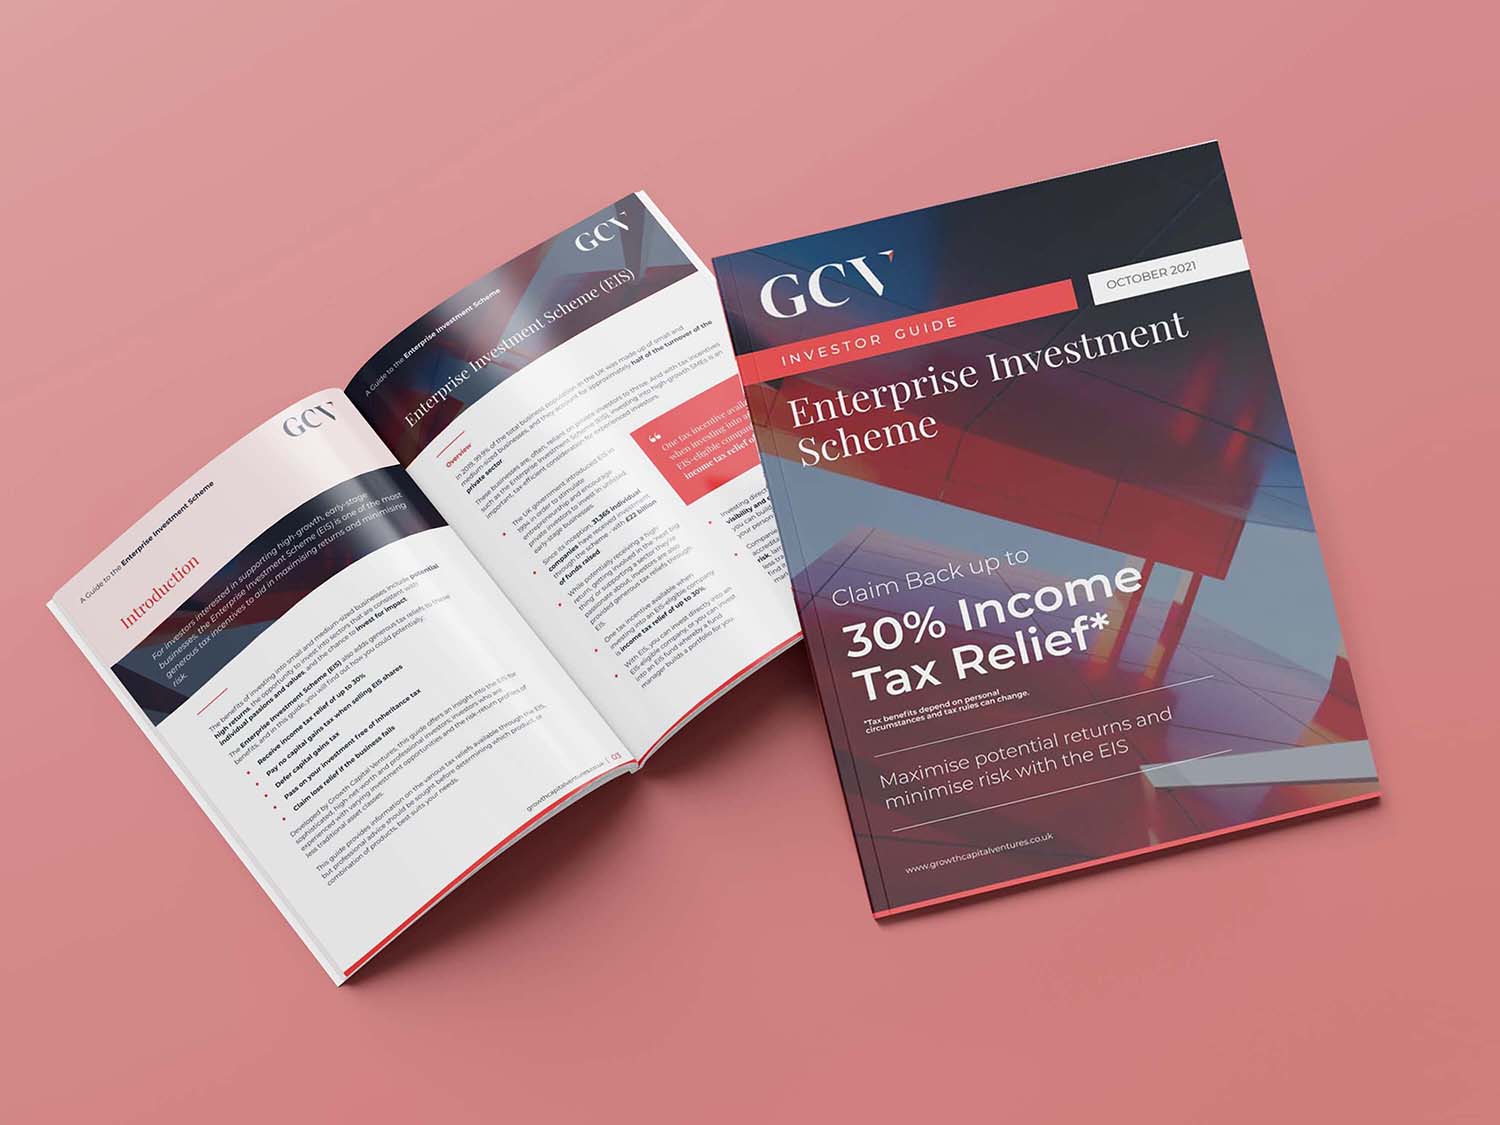 Guide to the Enterprise Investment Scheme